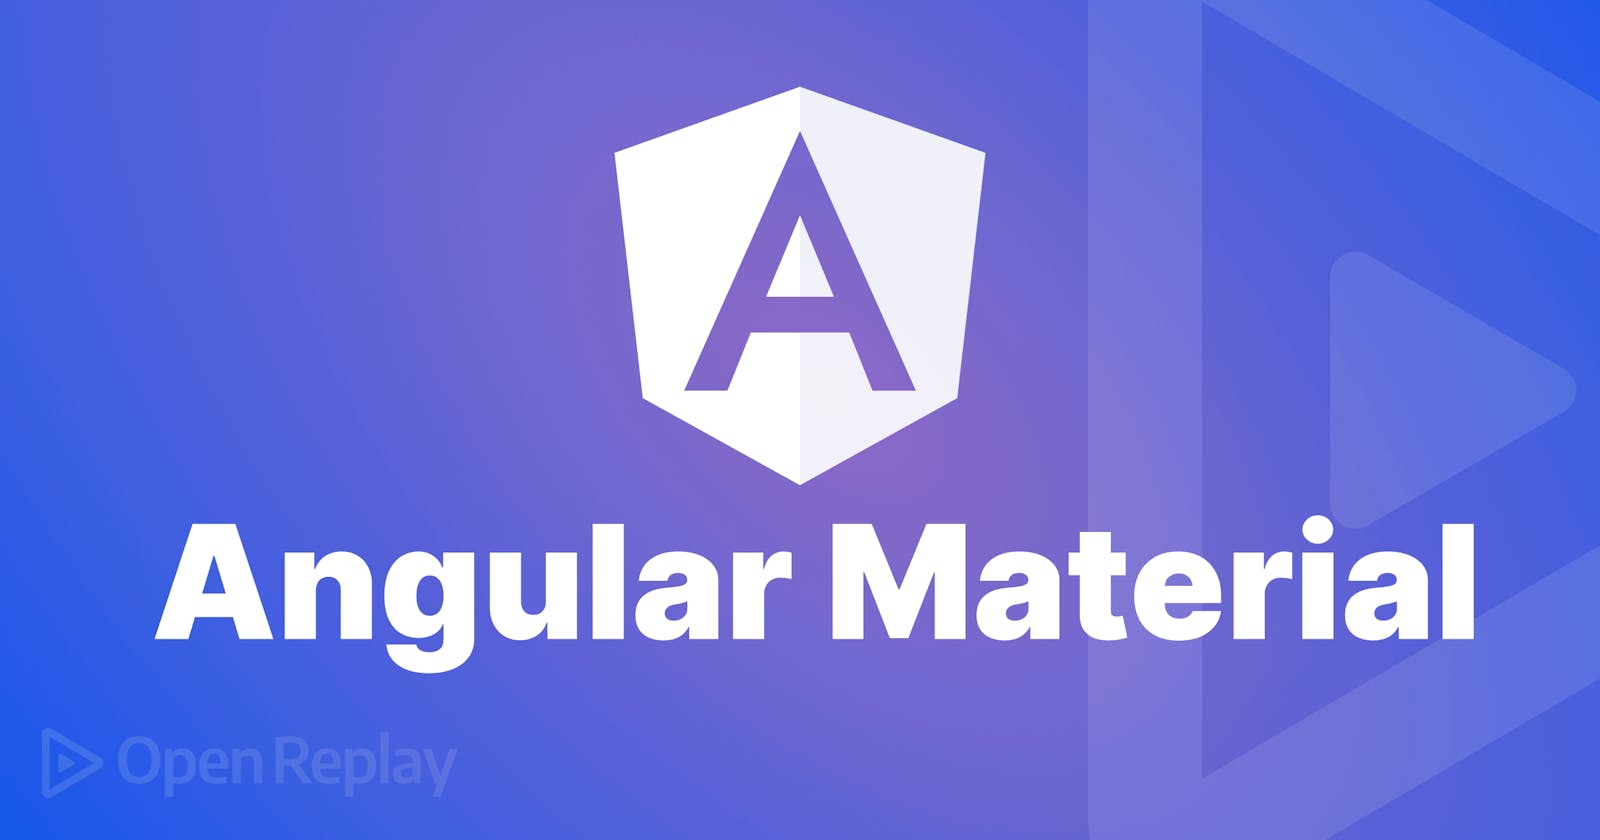 Getting started with Angular Material UI